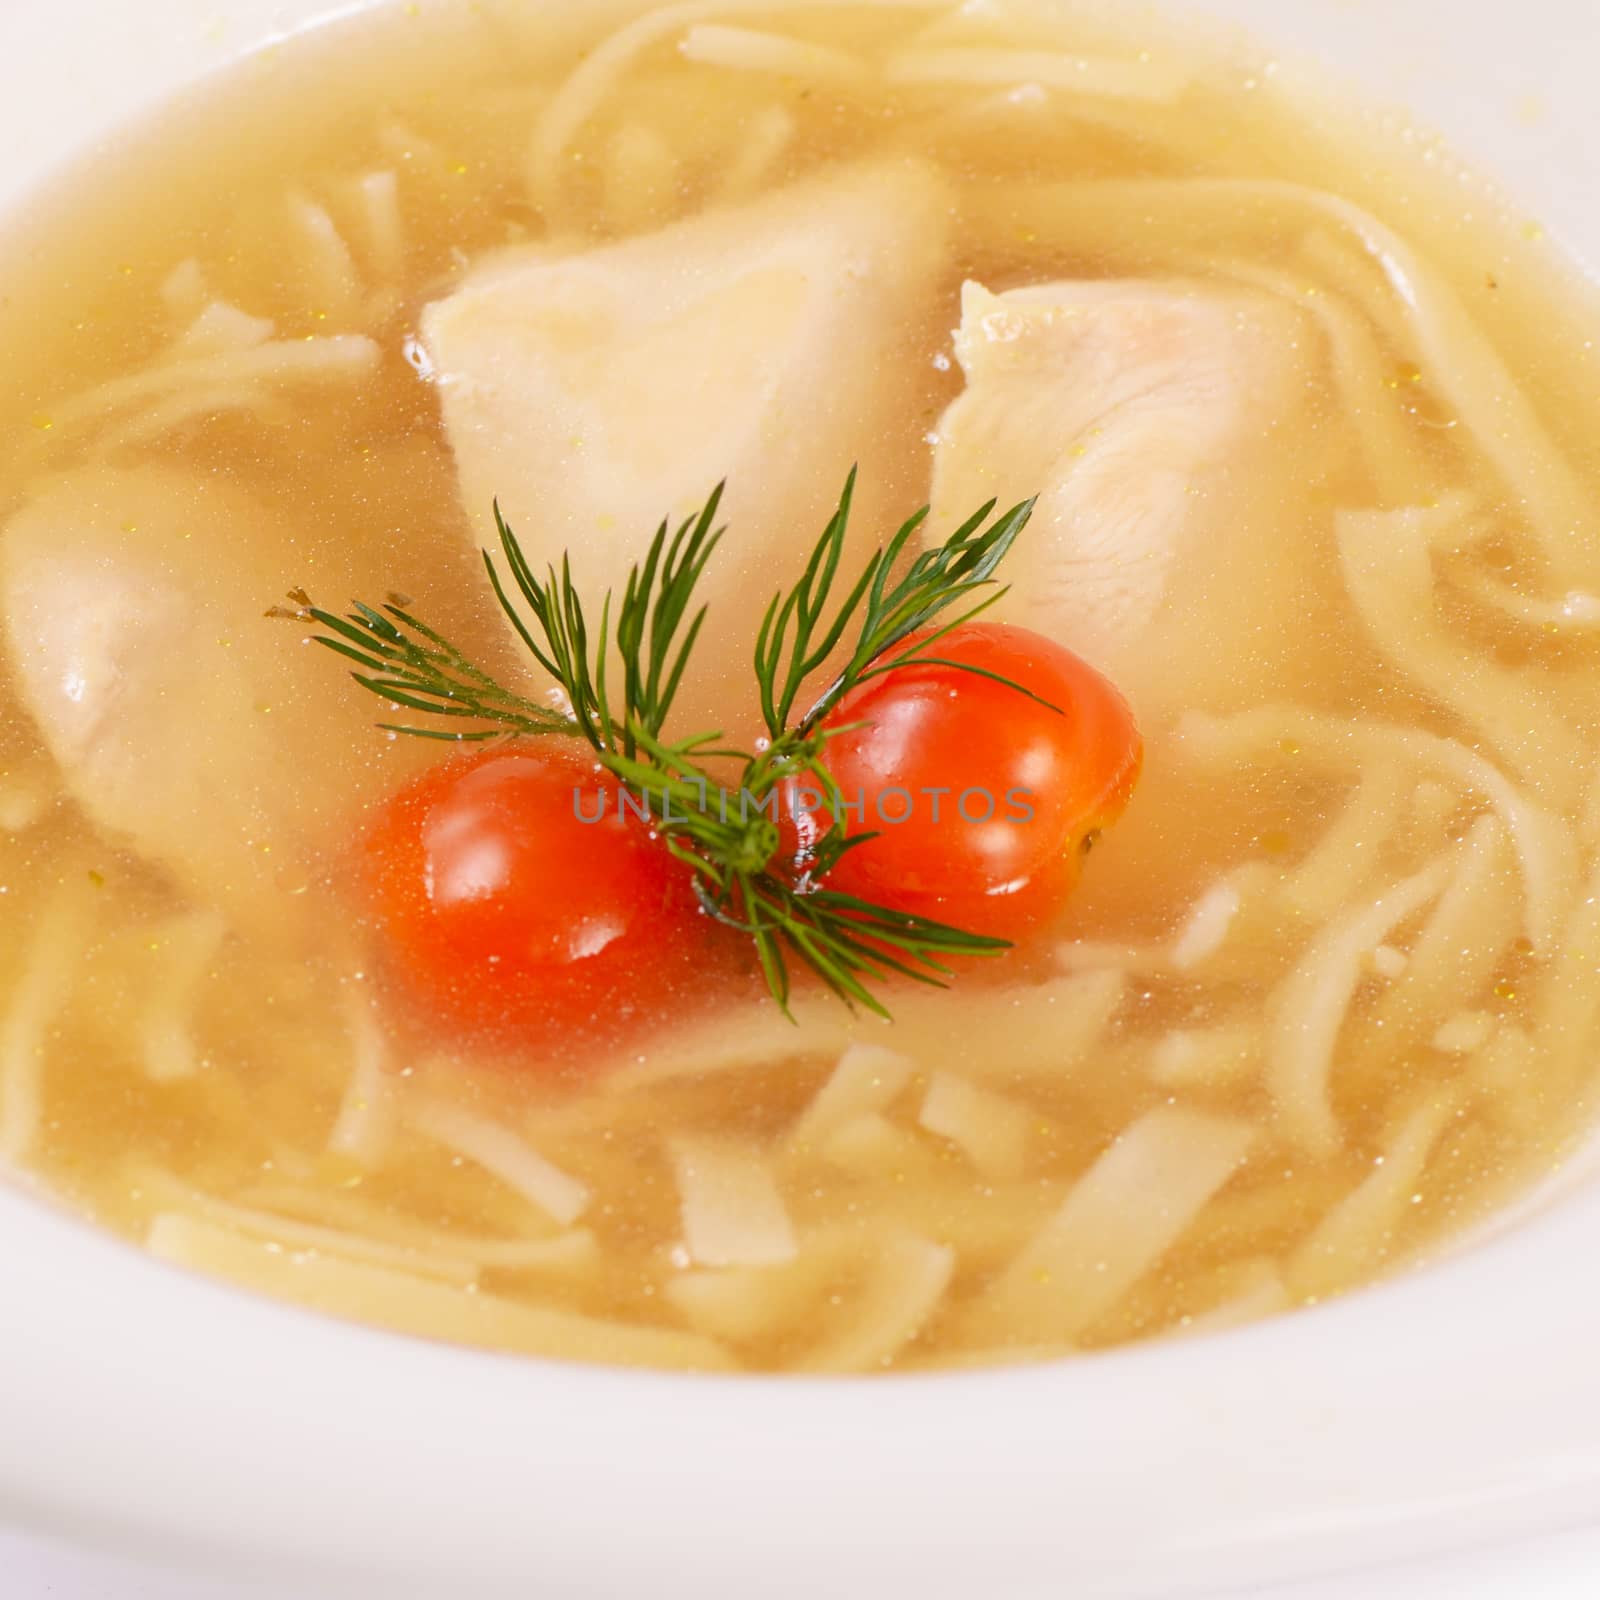 Soup homemade noodles with a chicken close up by SvetaVo